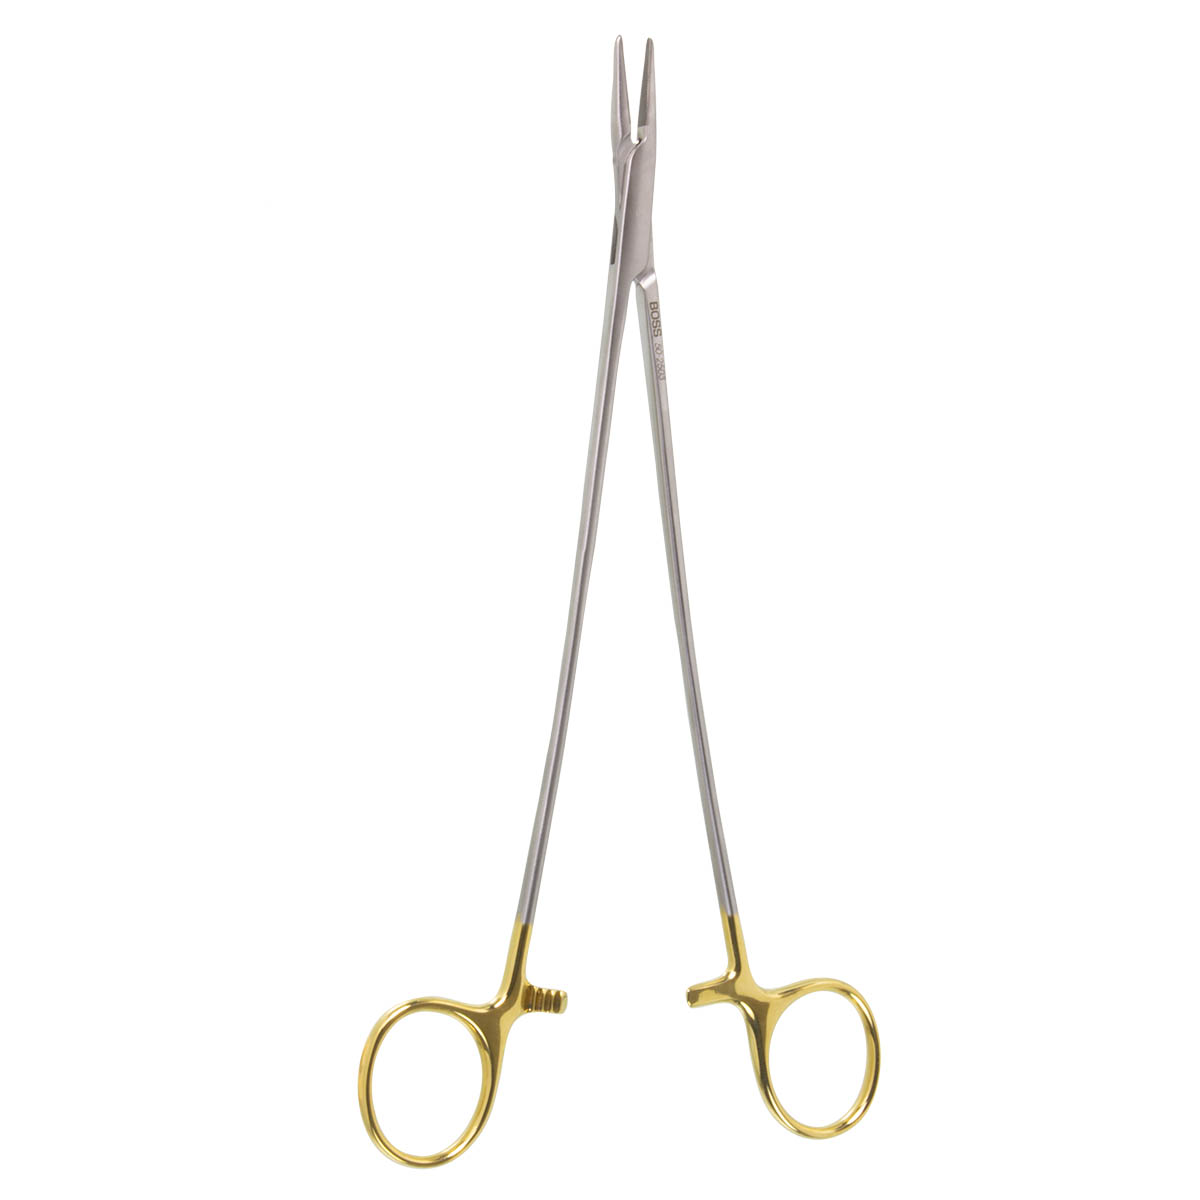 Webster Needle Holder 5 in Straight 2mm Smooth